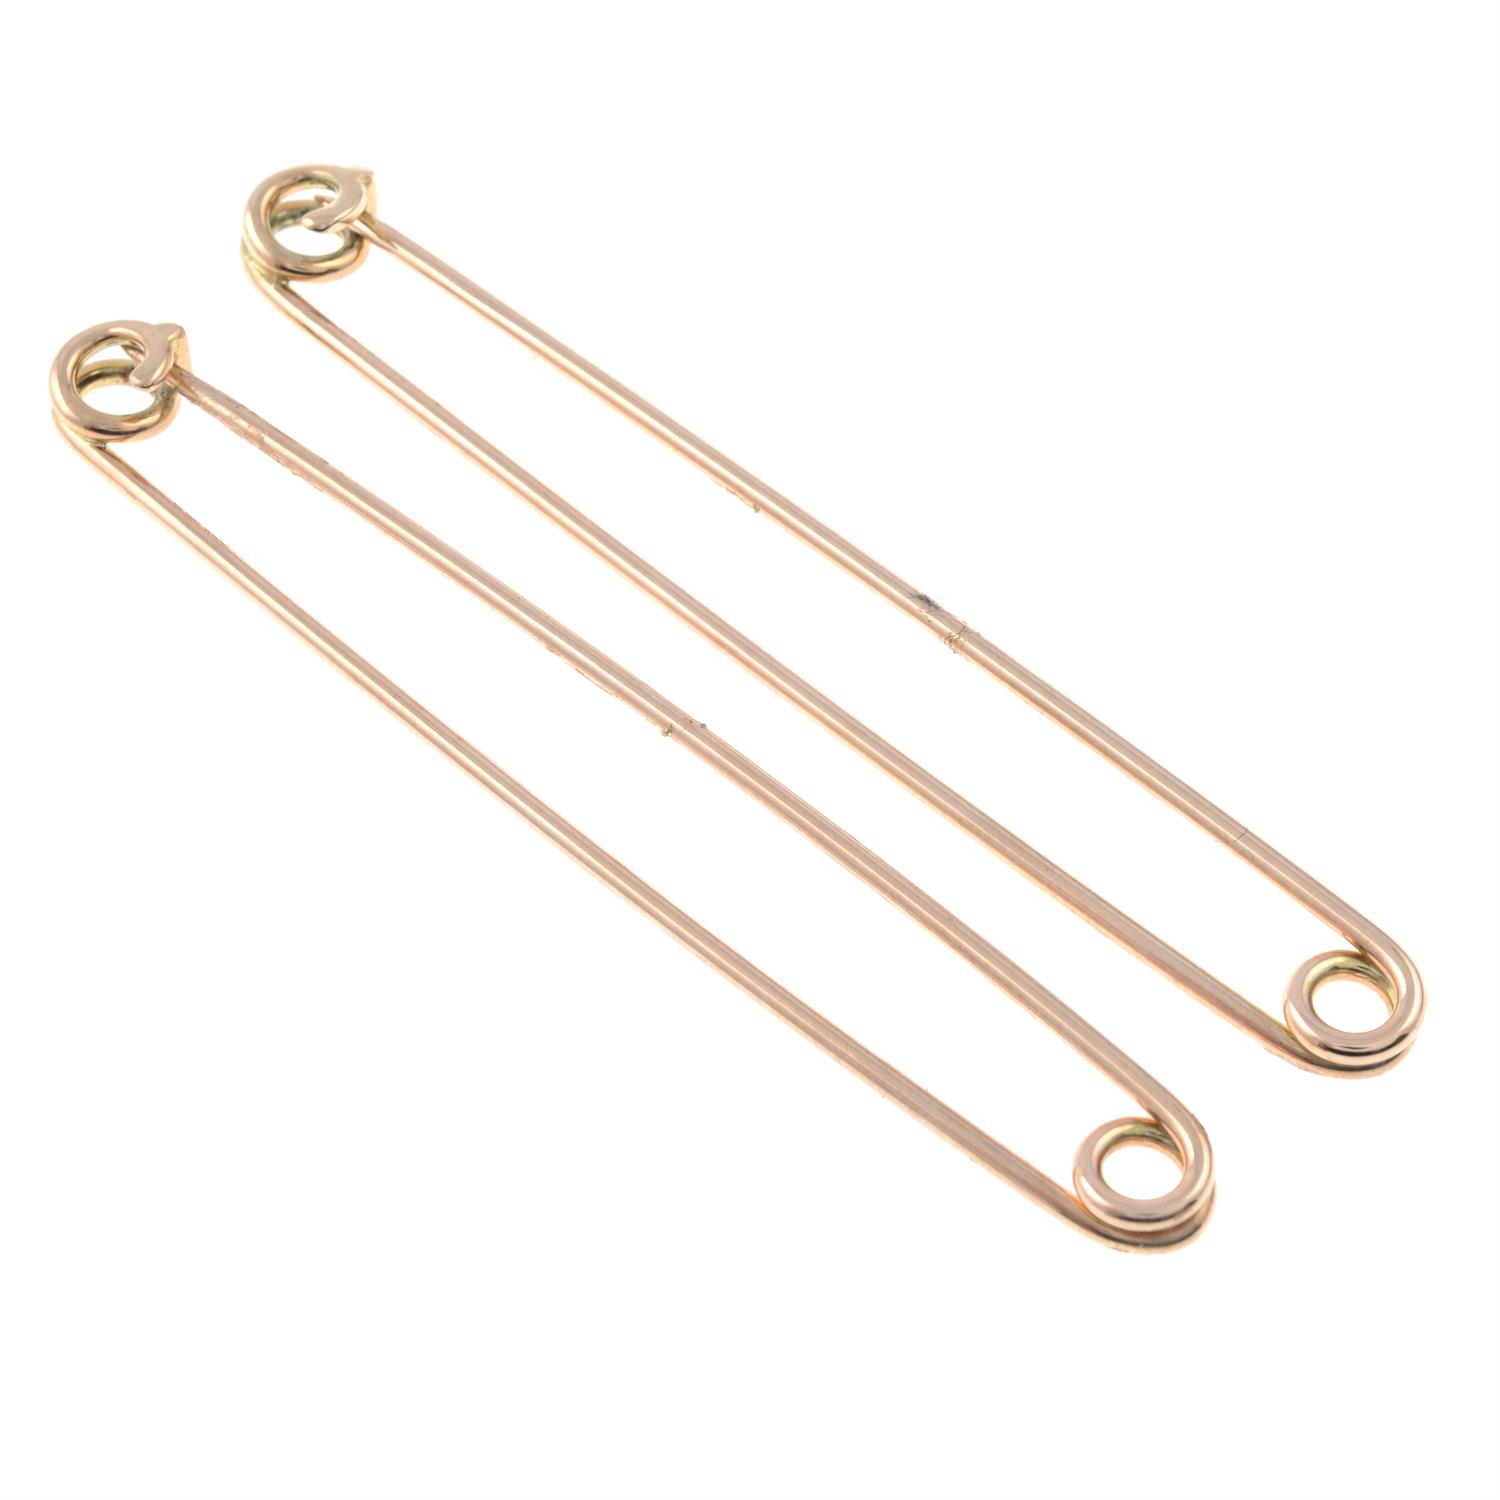 Two 9ct gold safety pins. - Image 2 of 2